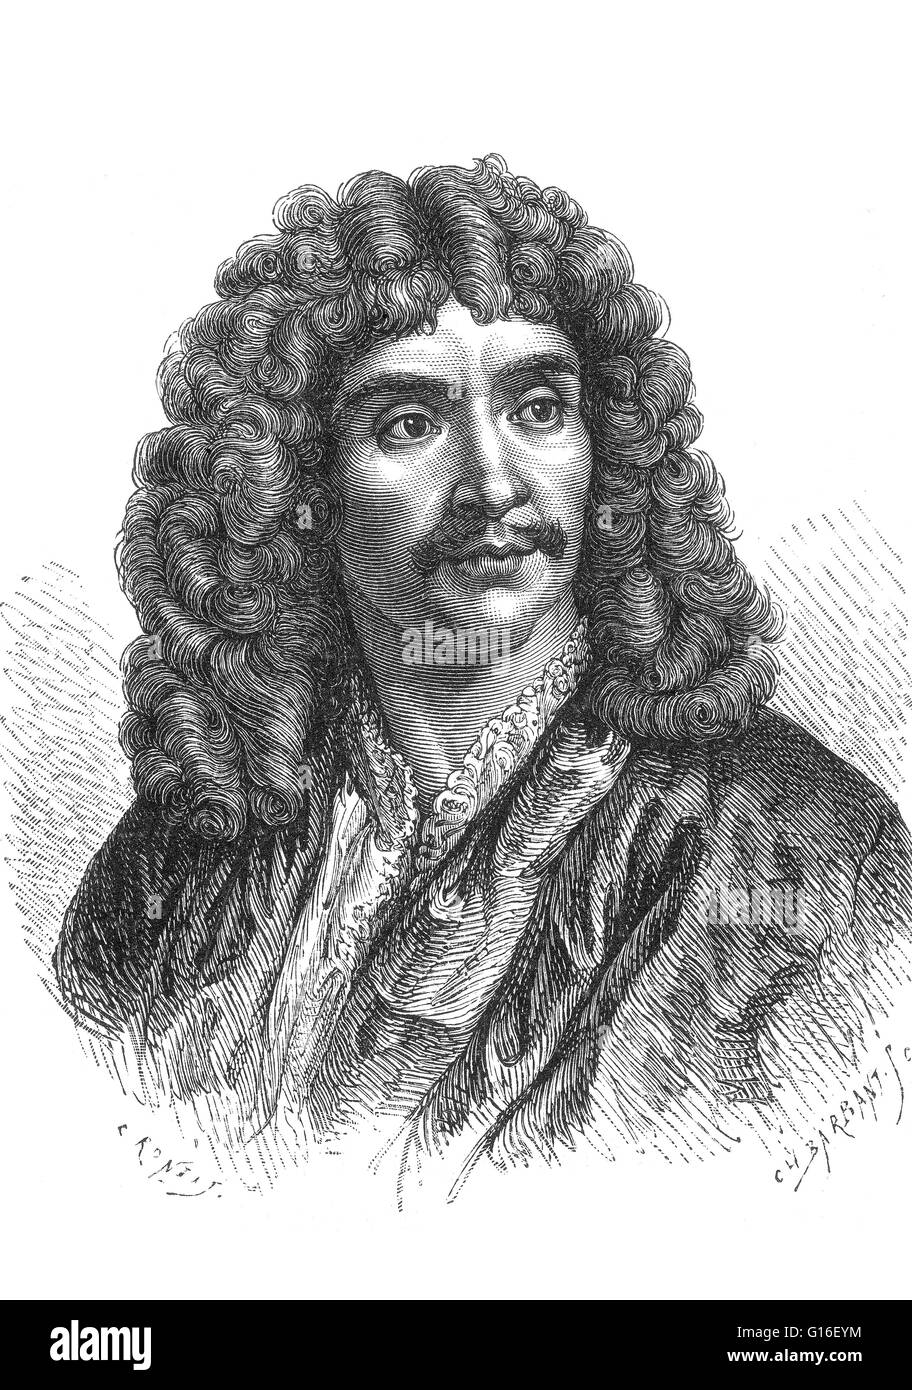 Jean-Baptiste Poquelin, known by his stage name Molière (January 15,1622 - February 17,1673) was a French playwright and actor who is considered to be one of the greatest masters of comedy in Western literature. Born into a prosperous family and having st Stock Photo